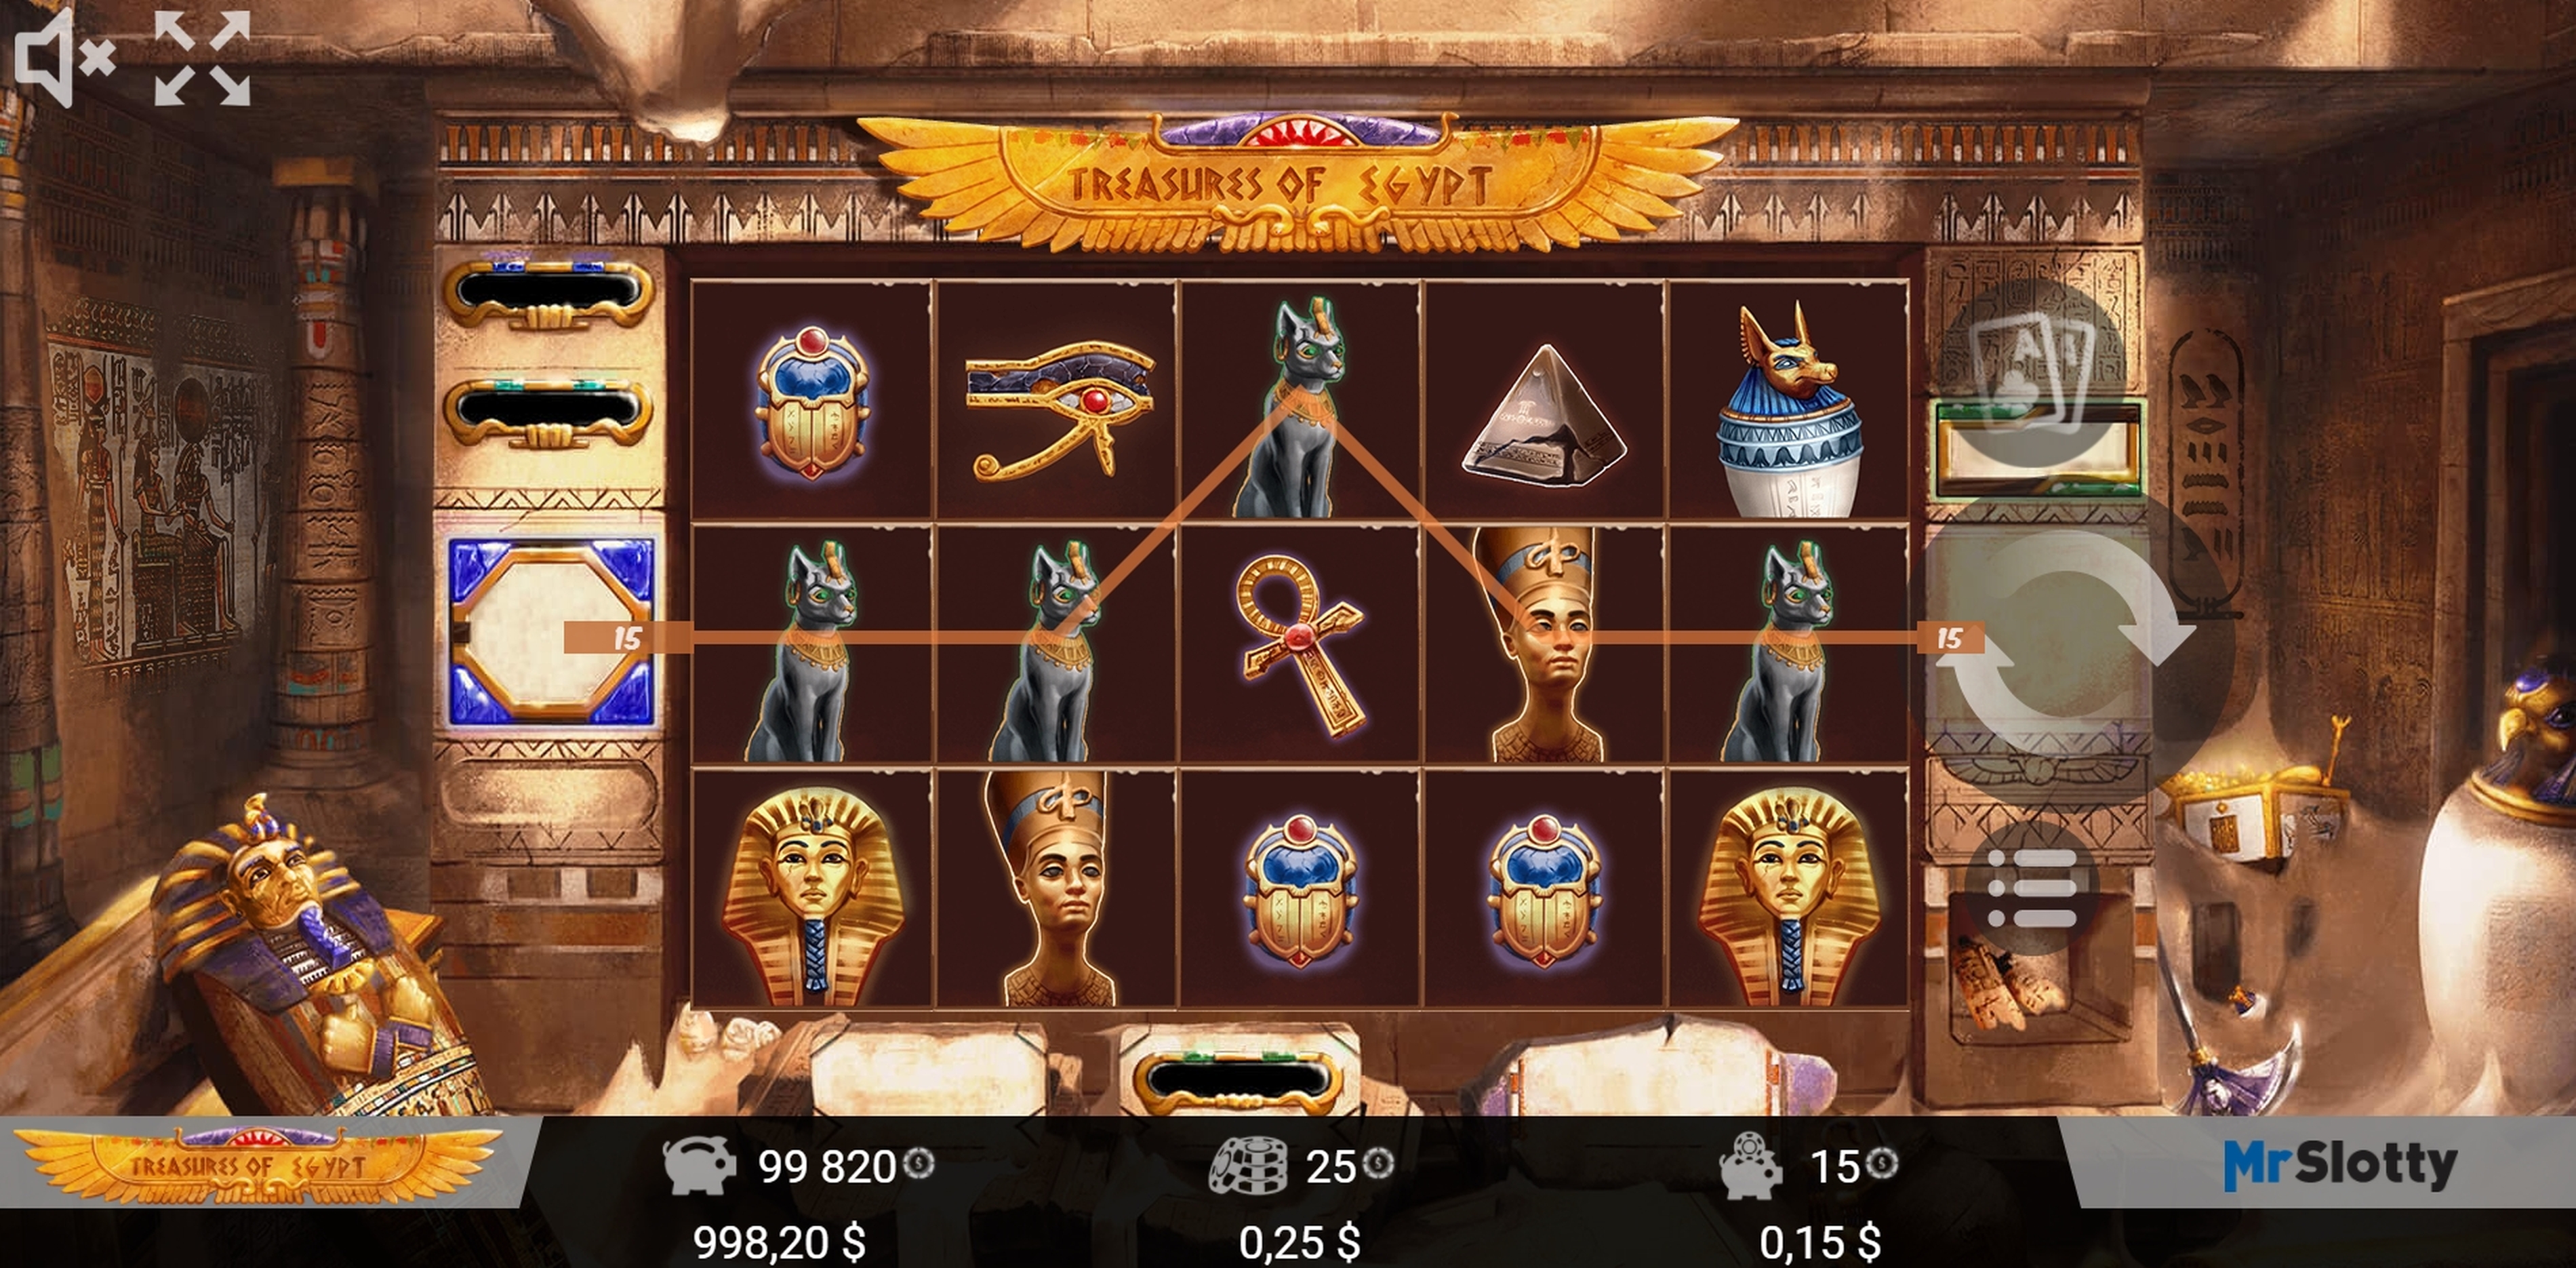 Win Money in Treasures of Egypt Free Slot Game by Mr Slotty